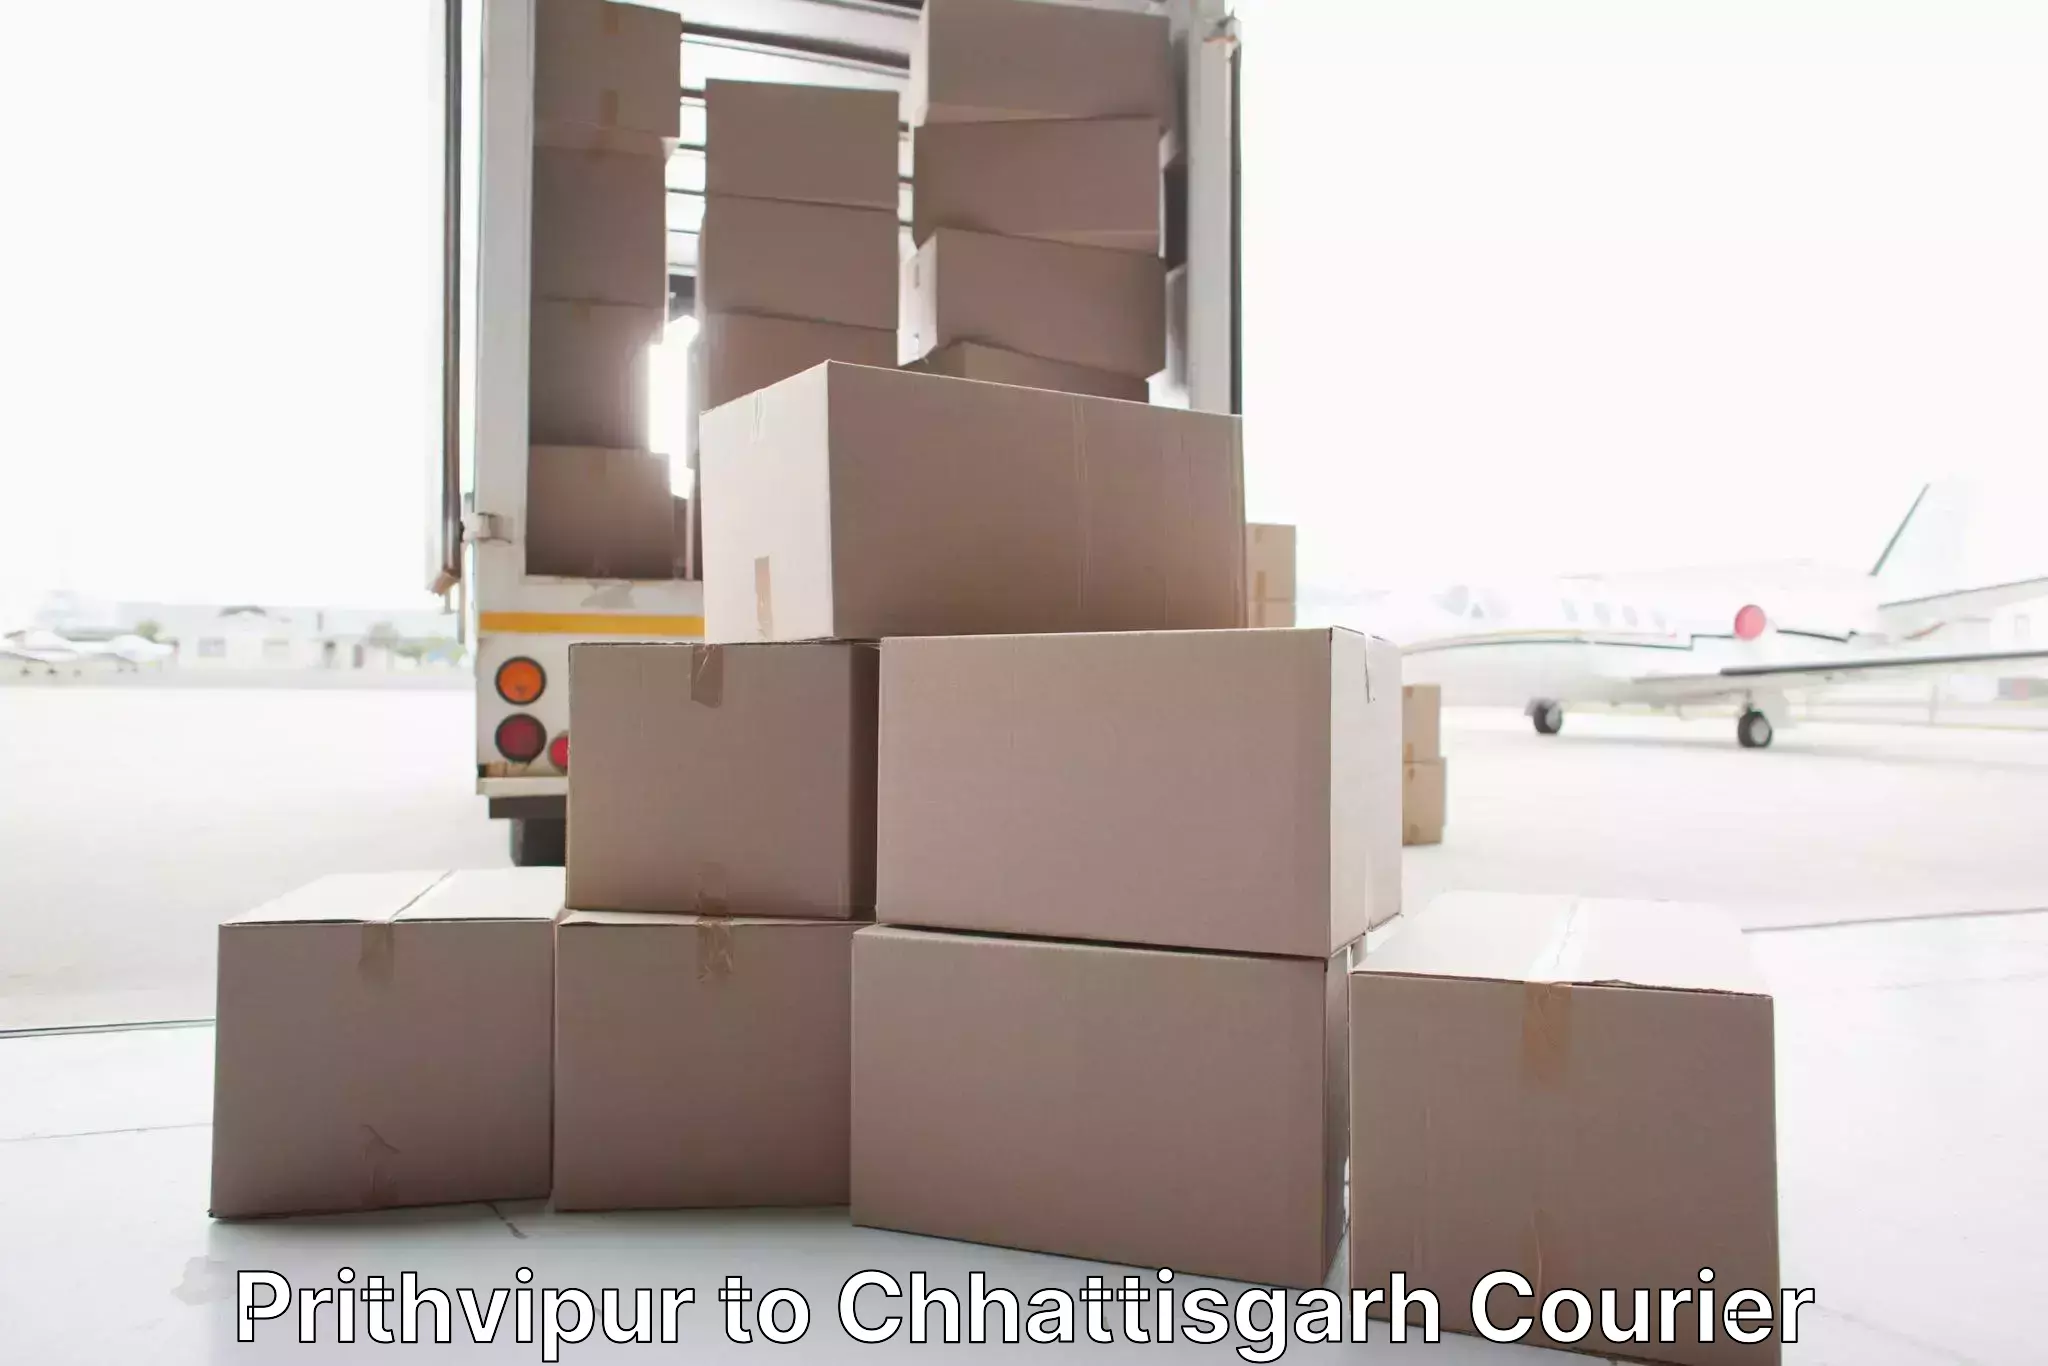 Professional moving company Prithvipur to Pendra